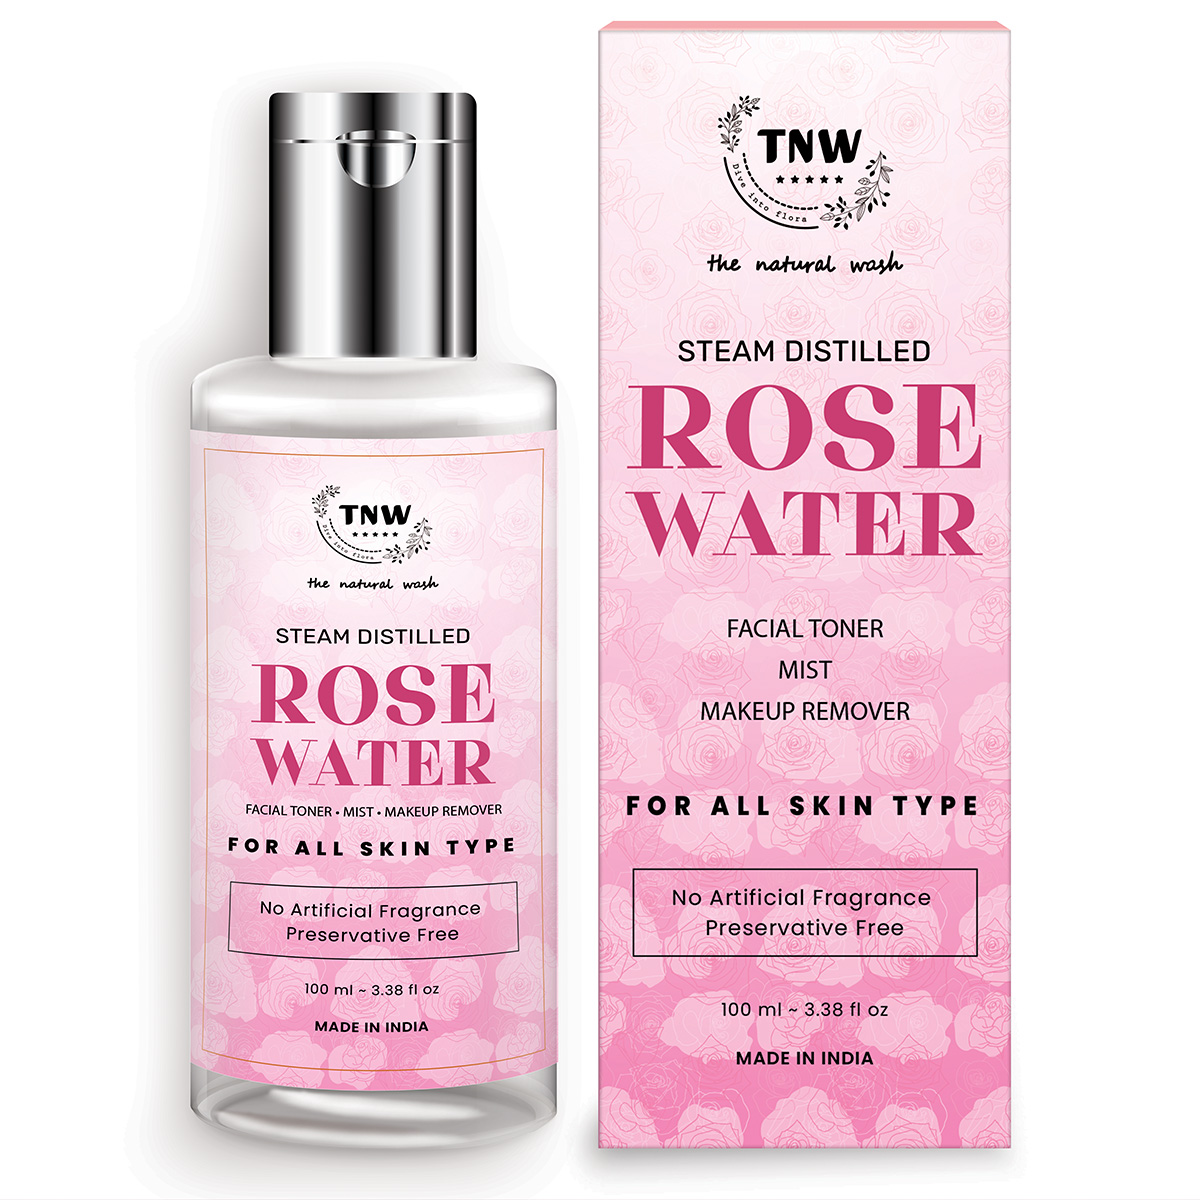 TNW - The Natural Wash Steam Distilled Rose Water For Makeup Remover